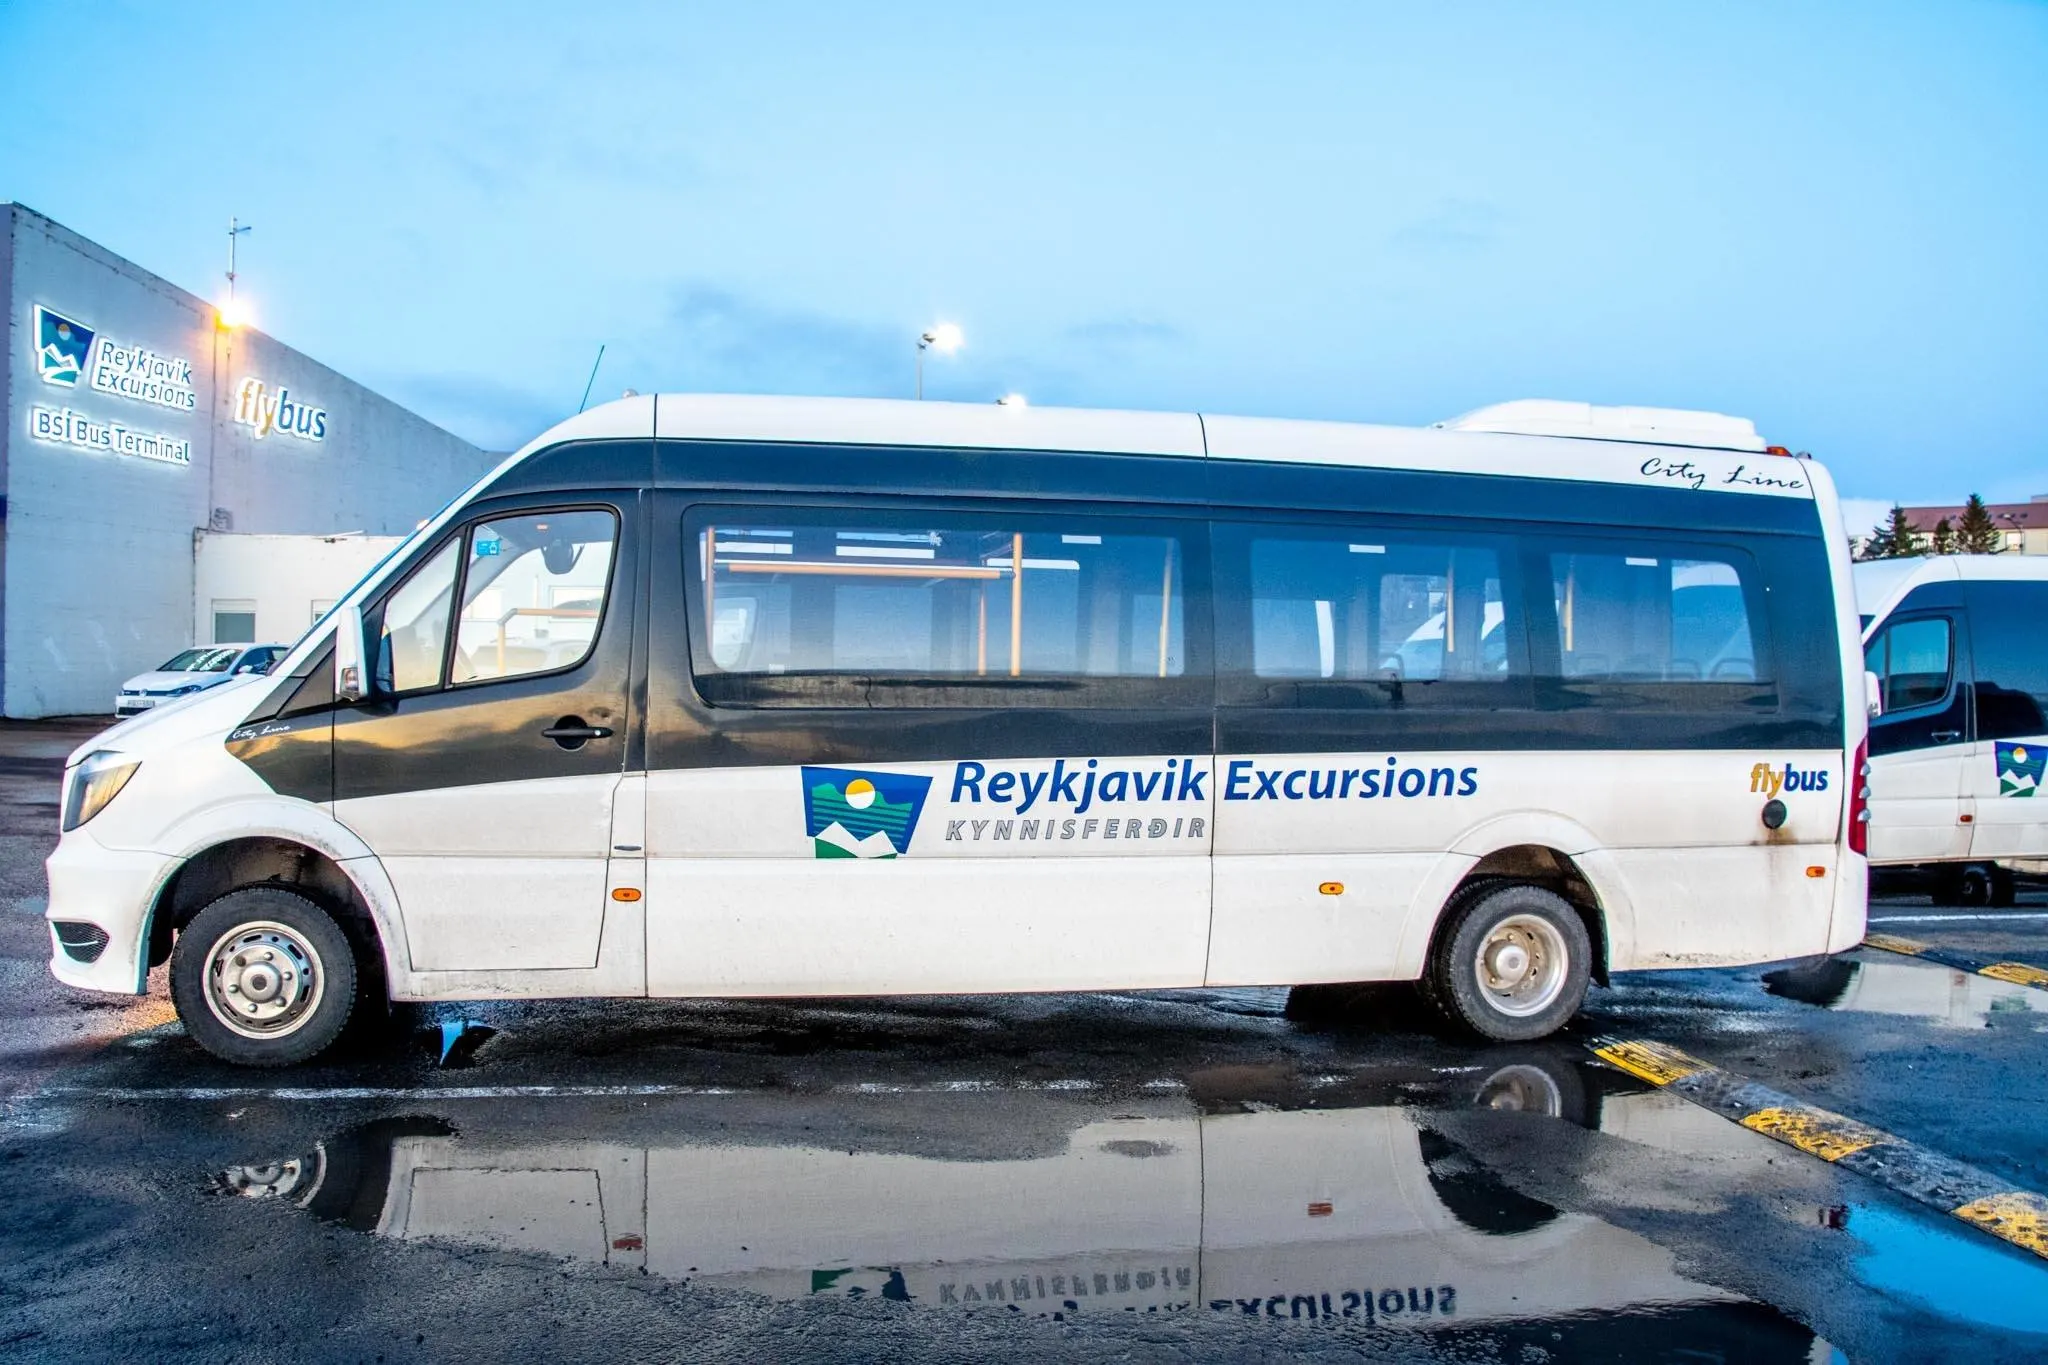 The Flybus+ pick-up service at the BSI Bus Terminal